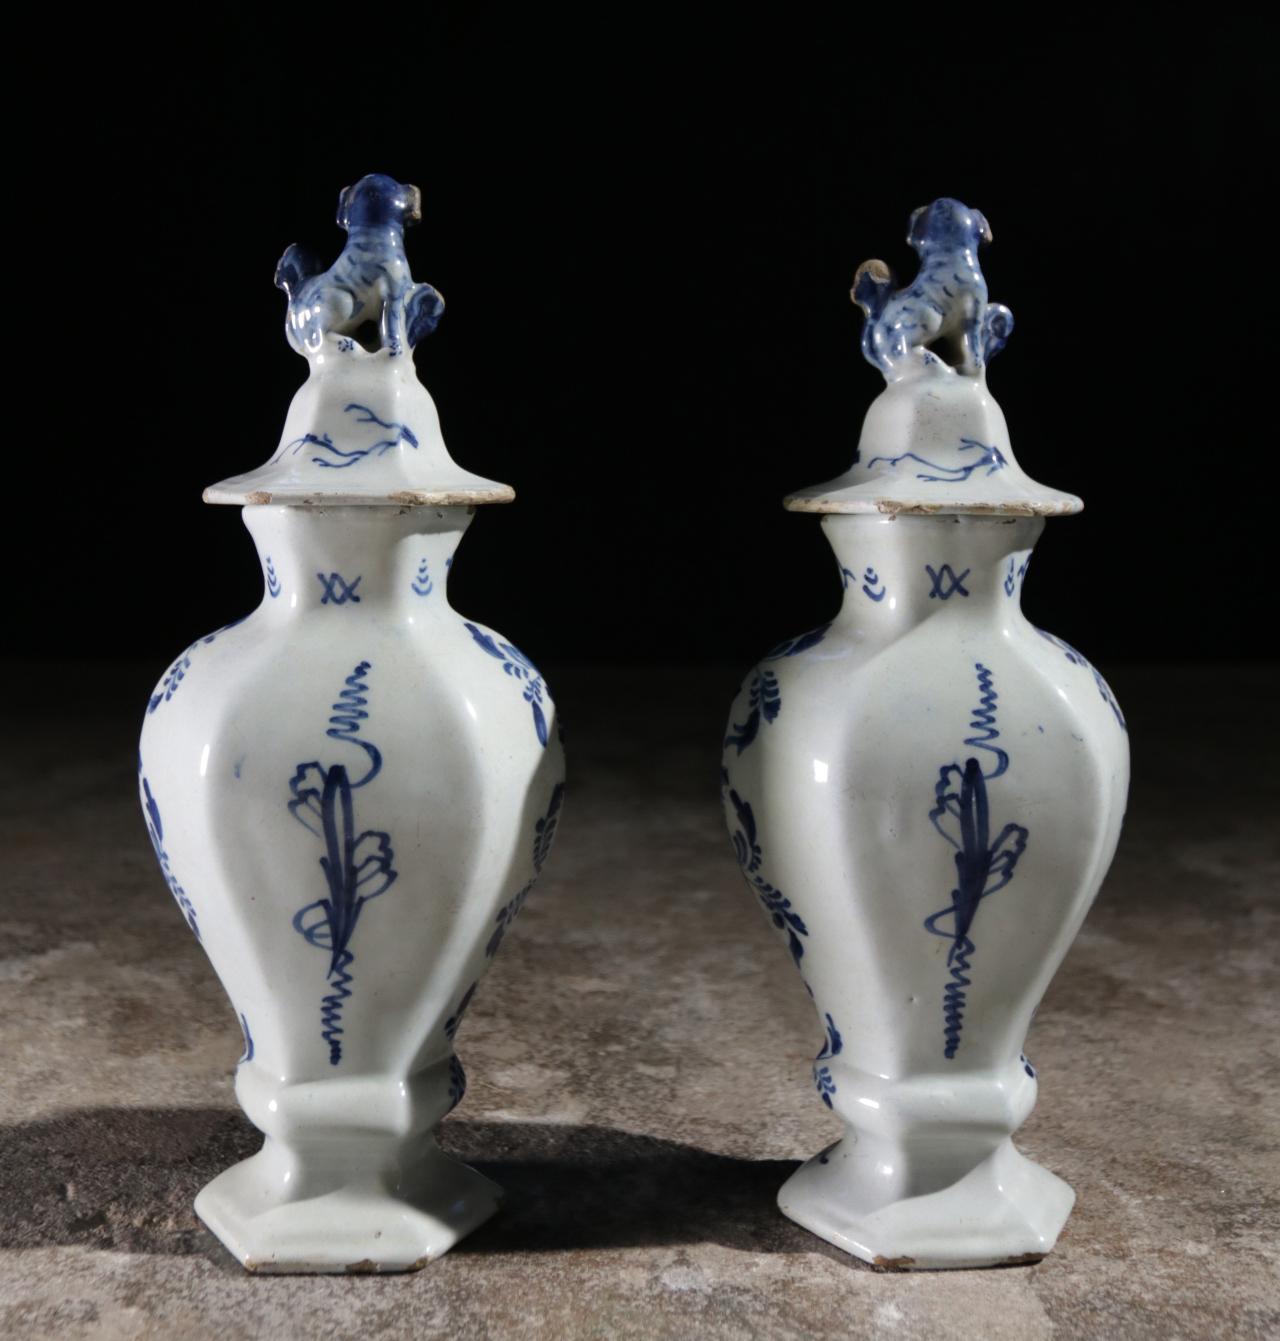 Two 18th century delft earthenware vases signed VB (Pieter van den Briel 't Fortuyn, 1753-1759)
In original condition, no restorations as you can see on the photo's.

VB mark 
: Van den Briel

later used by: widow Van den Briel-Elling

Pieter van